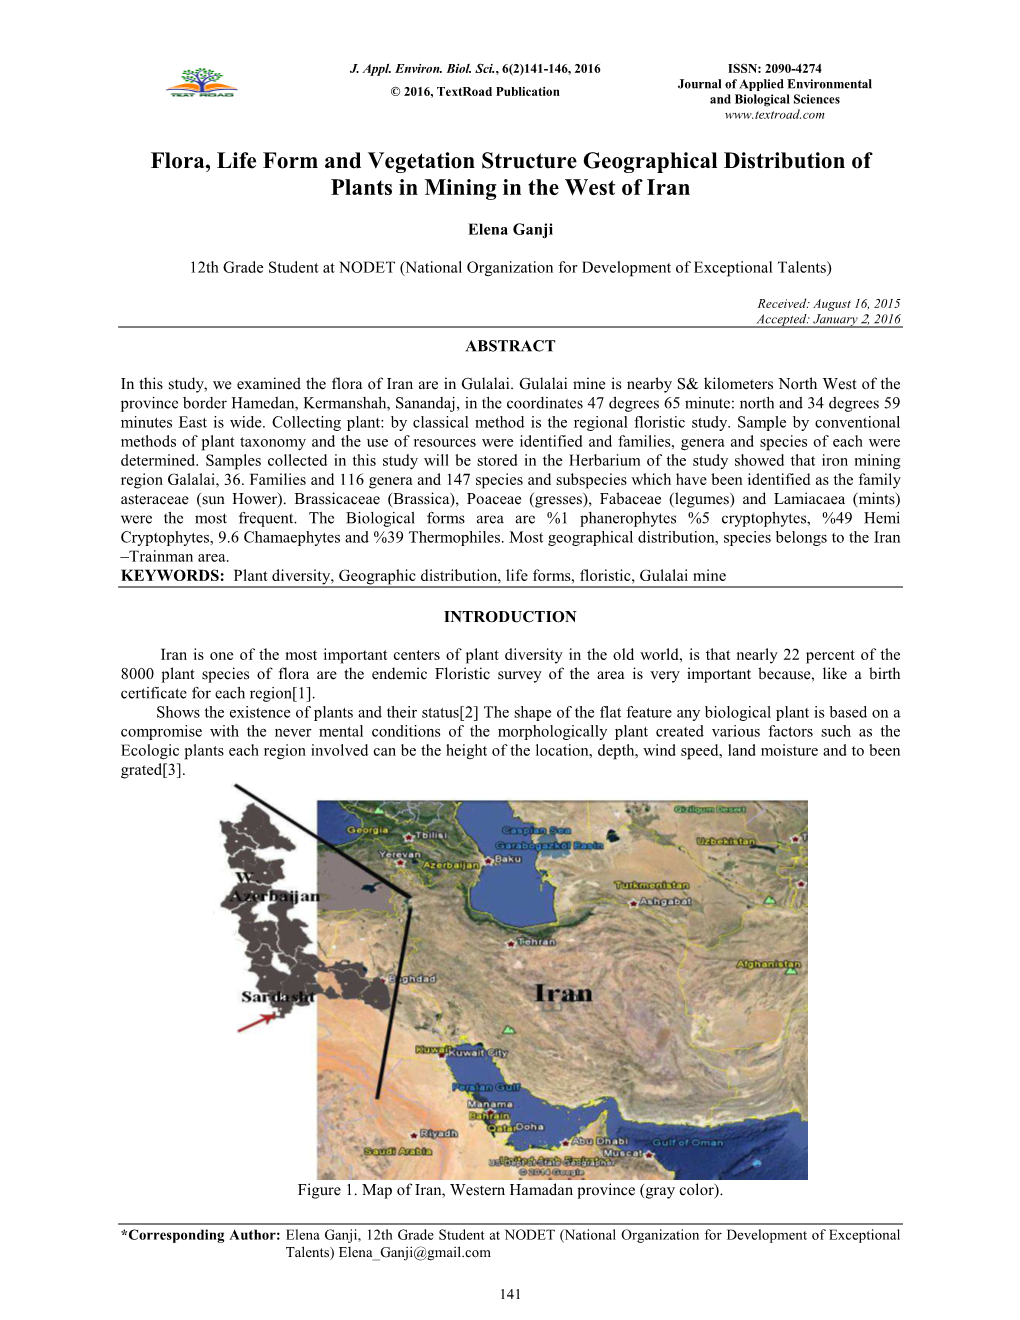 Flora, Life Form and Vegetation Structure Geographical Distribution of Plants in Mining in the West of Iran